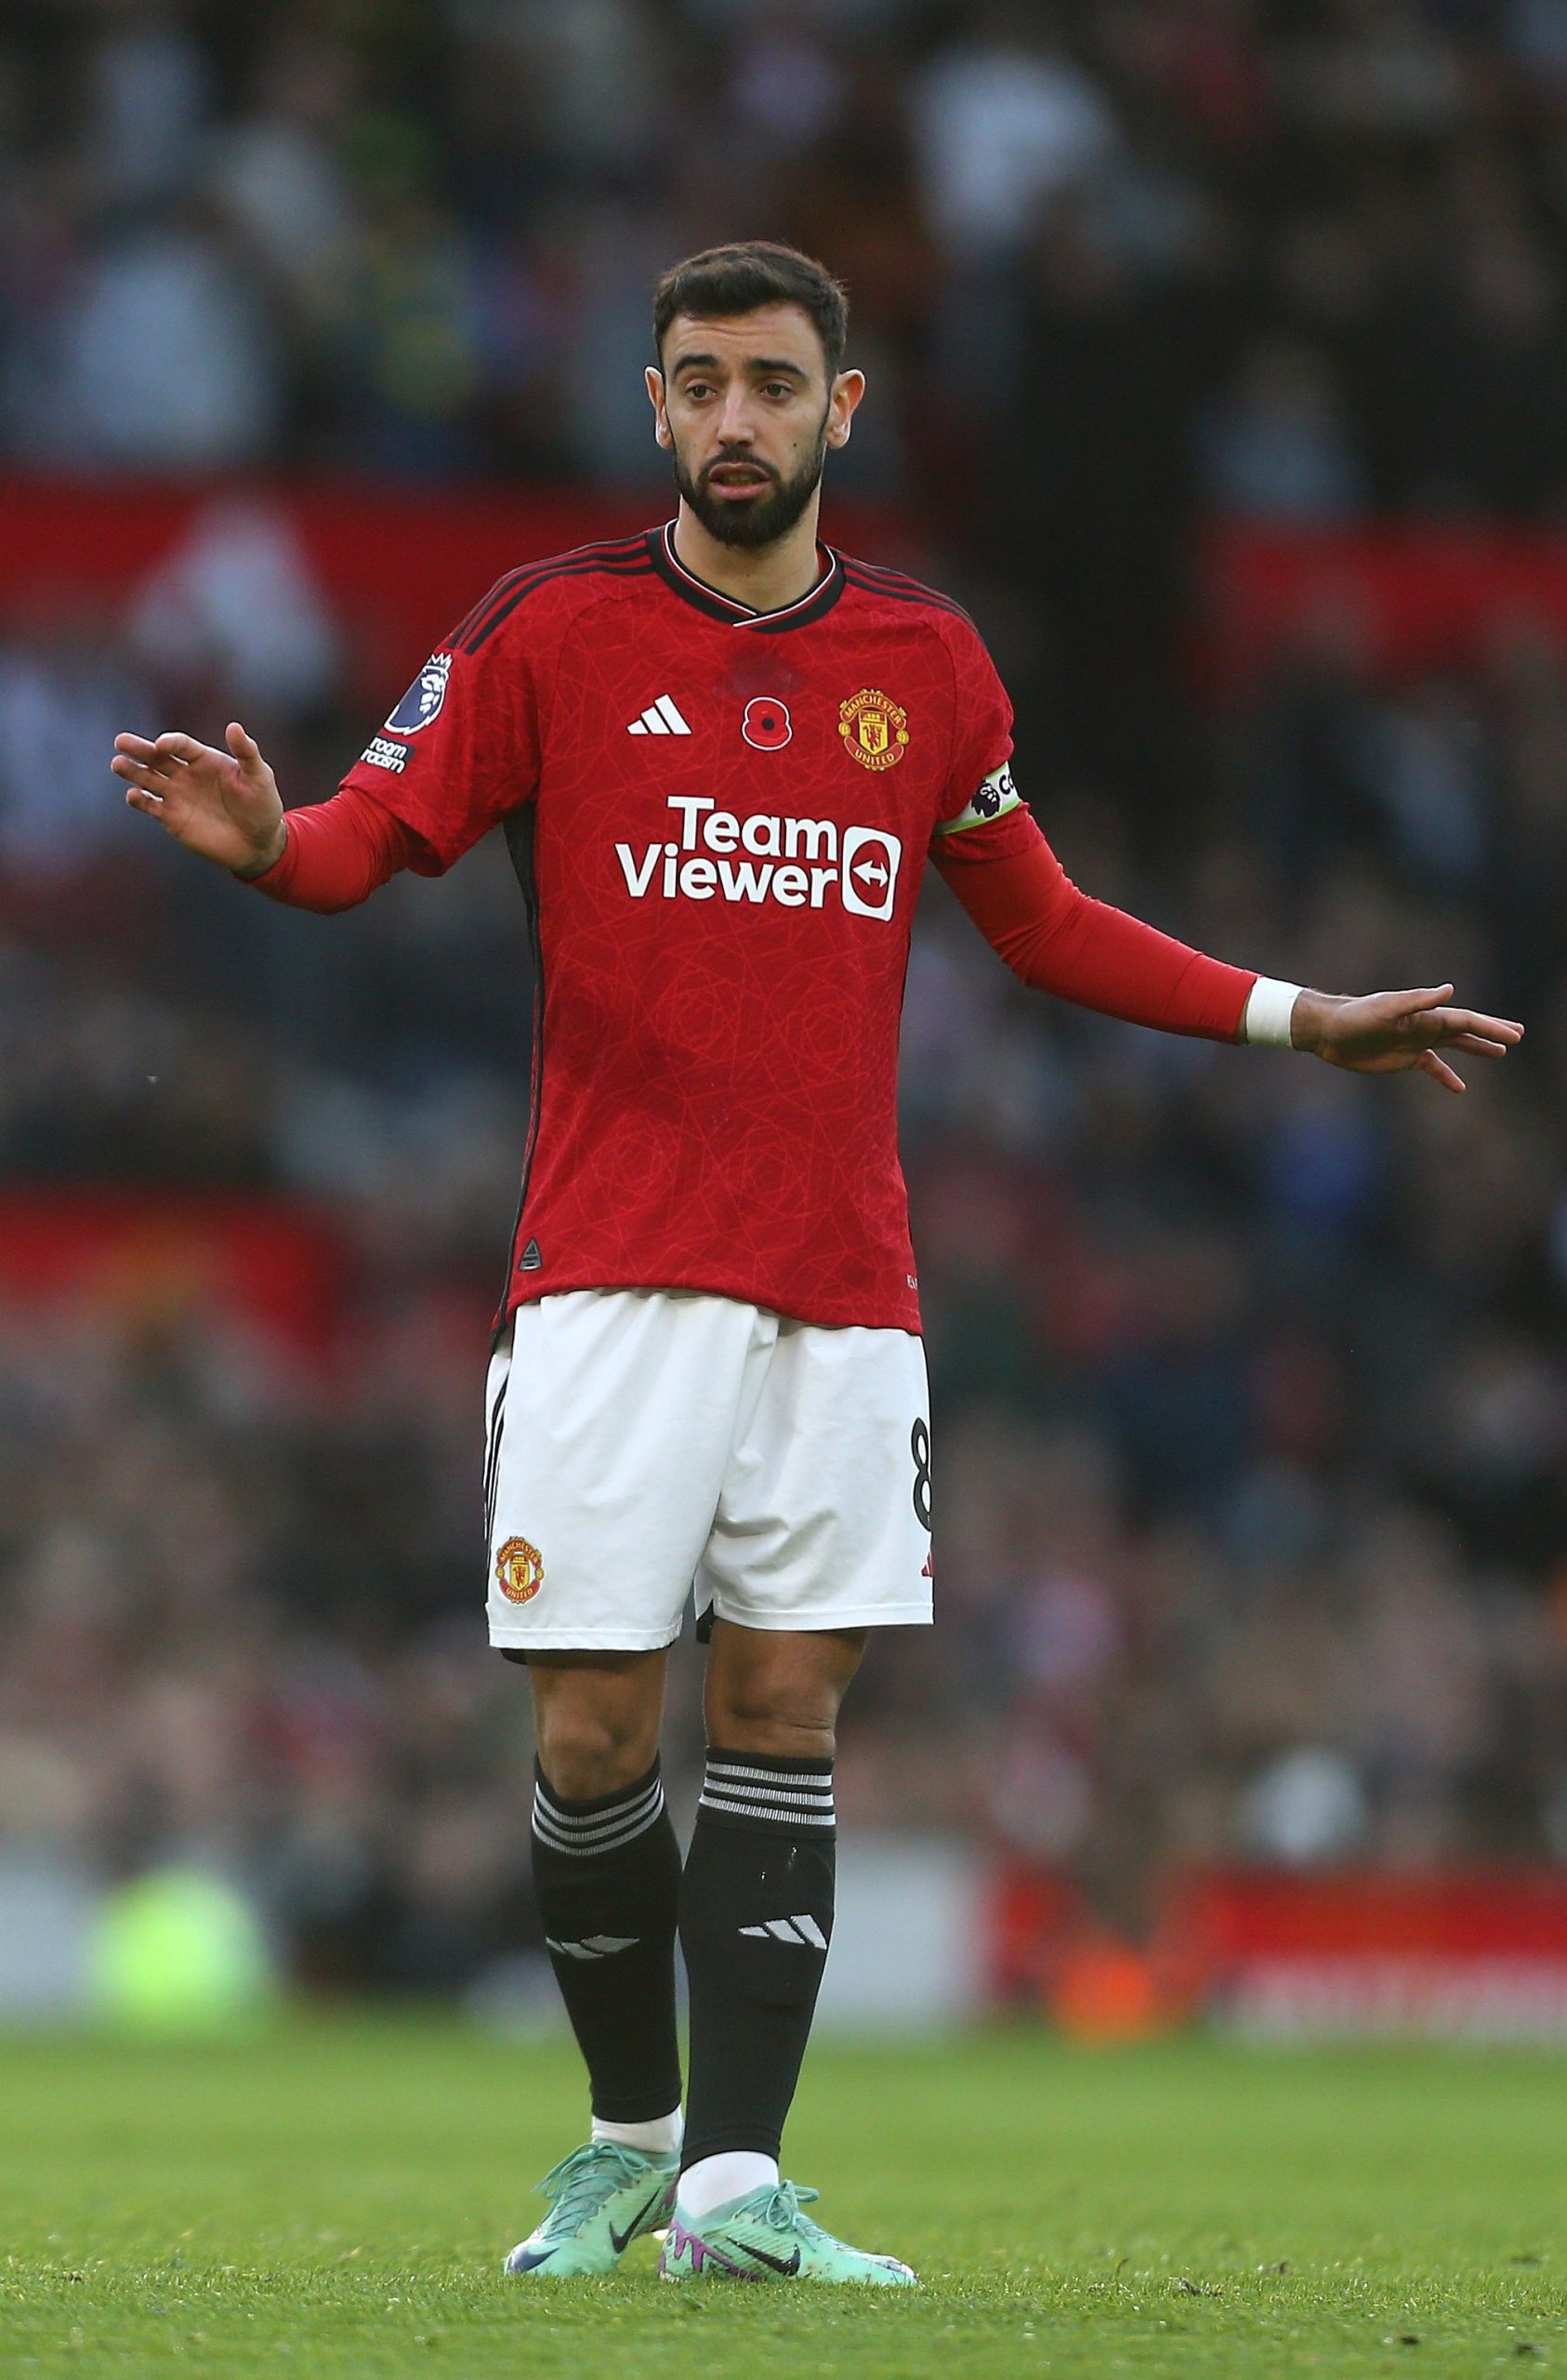 Man Utd ‘set to receive £87m transfer bid for Bruno Fernandes with Saudi clubs desperate to land Portuguese star’